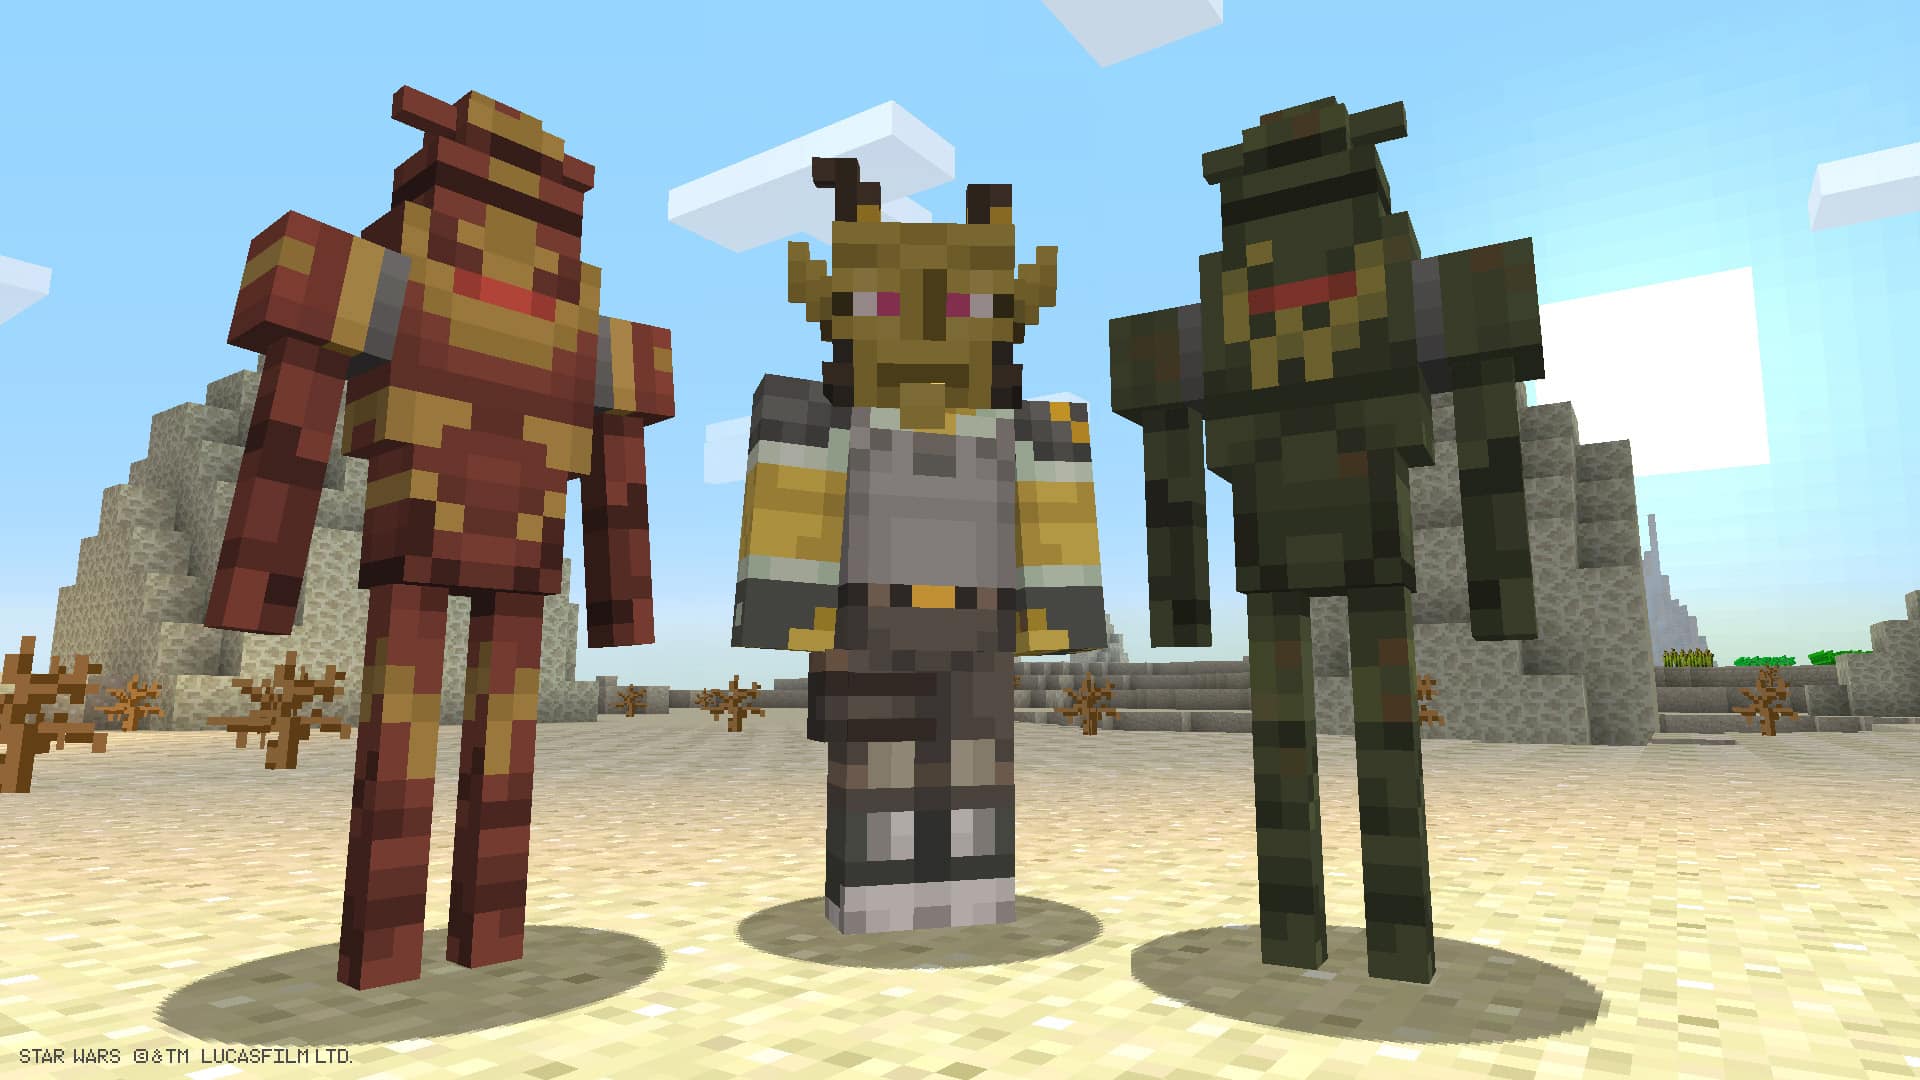 Star Wars Rebels Skin Pack Comes to Minecraft for Xbox.